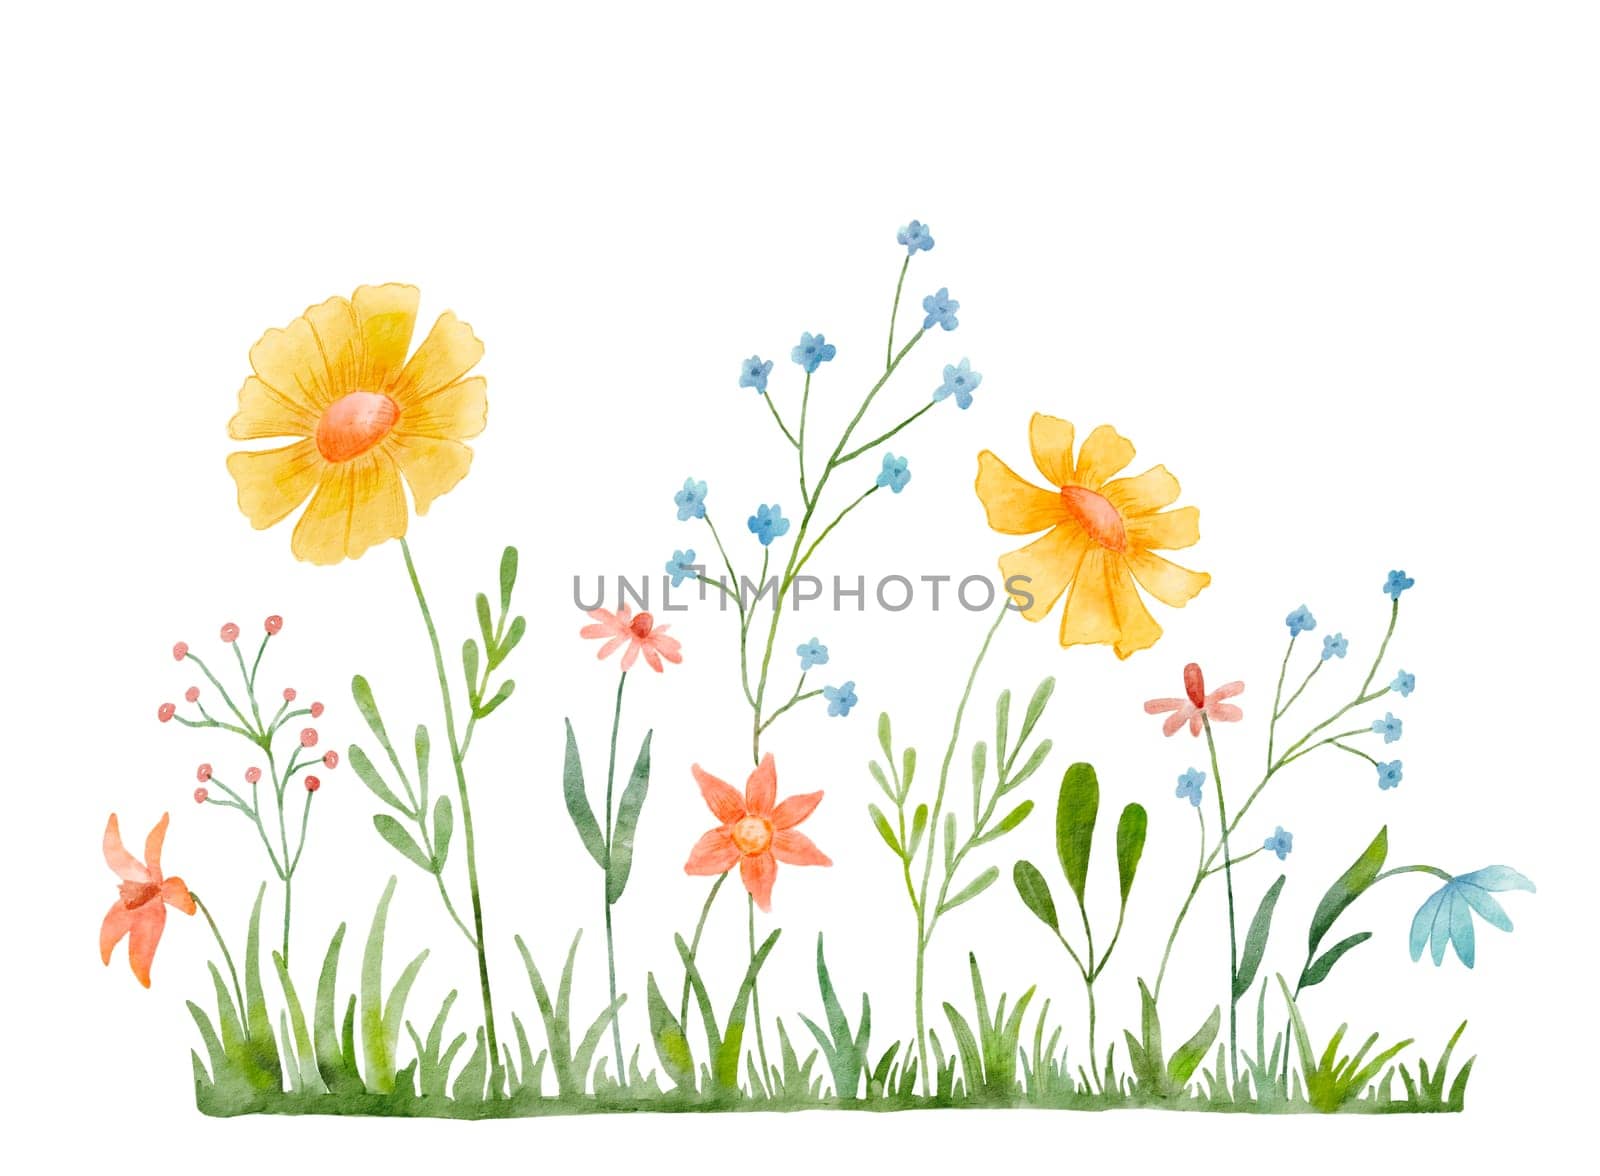 Watercolor wild herbs and flowers illustration. Field with grass and wildflowers isolated on white by ElenaPlatova